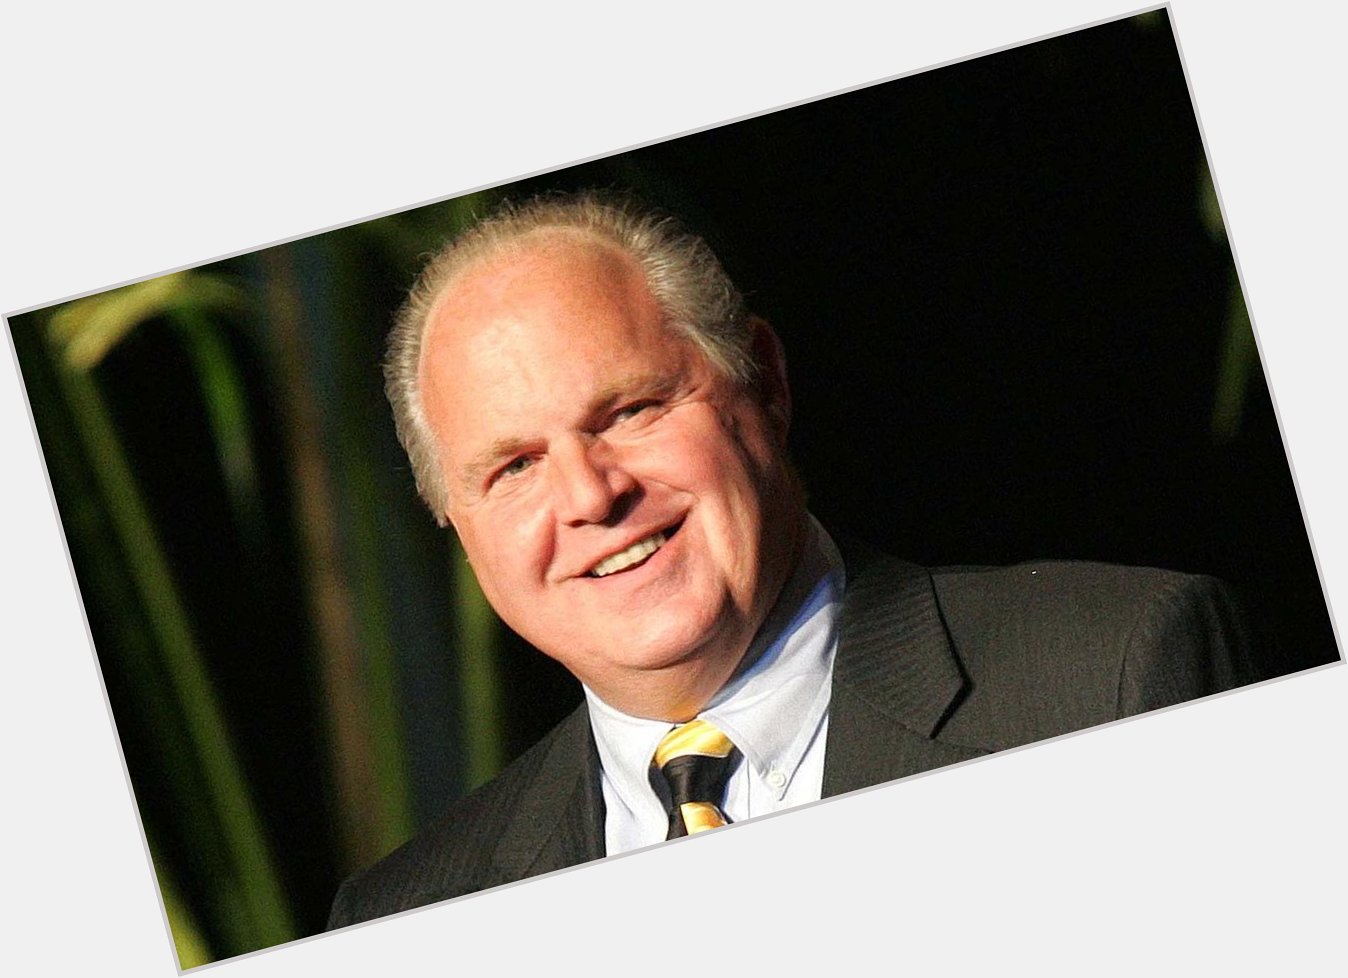 The great Rush Limbaugh would\ve turned 72 years old today.

Happy birthday Rush! 